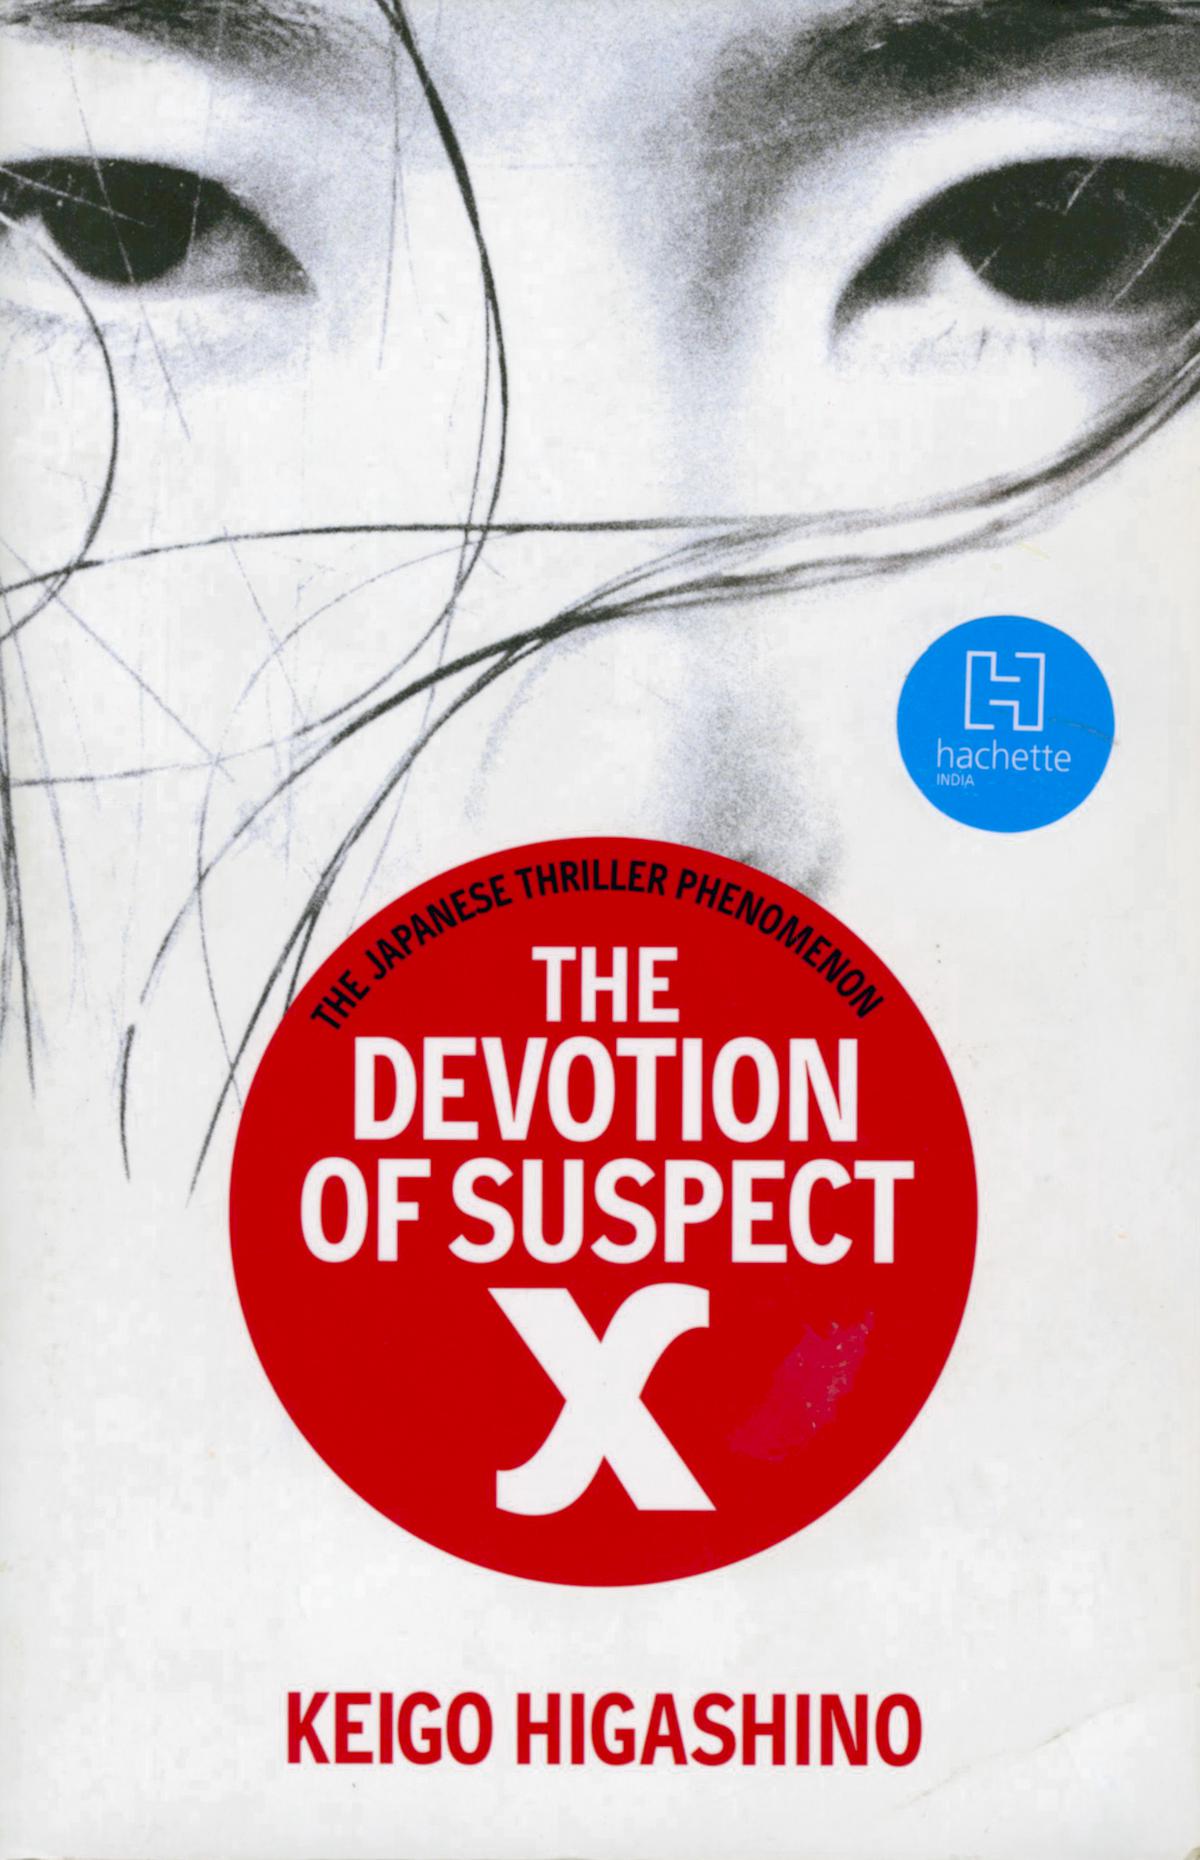 Keigo Higashino's Japanese thriller The Devotion of Suspect X is widely believed to be the inspiration for the Drishyam films.